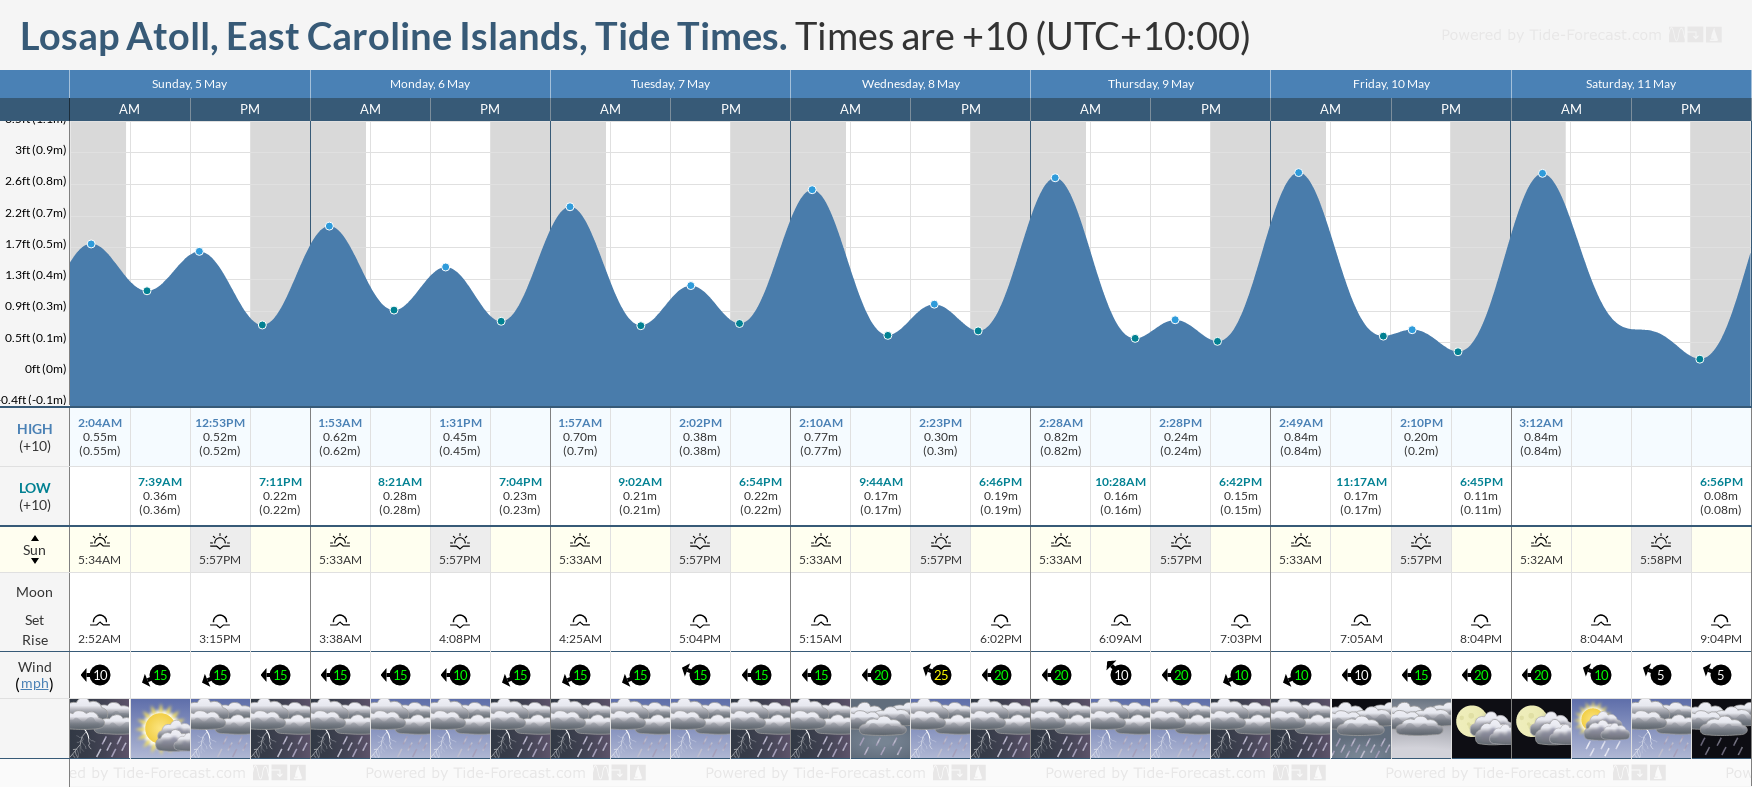 Losap Atoll, East Caroline Islands Tide Chart including high and low tide tide times for the next 7 days